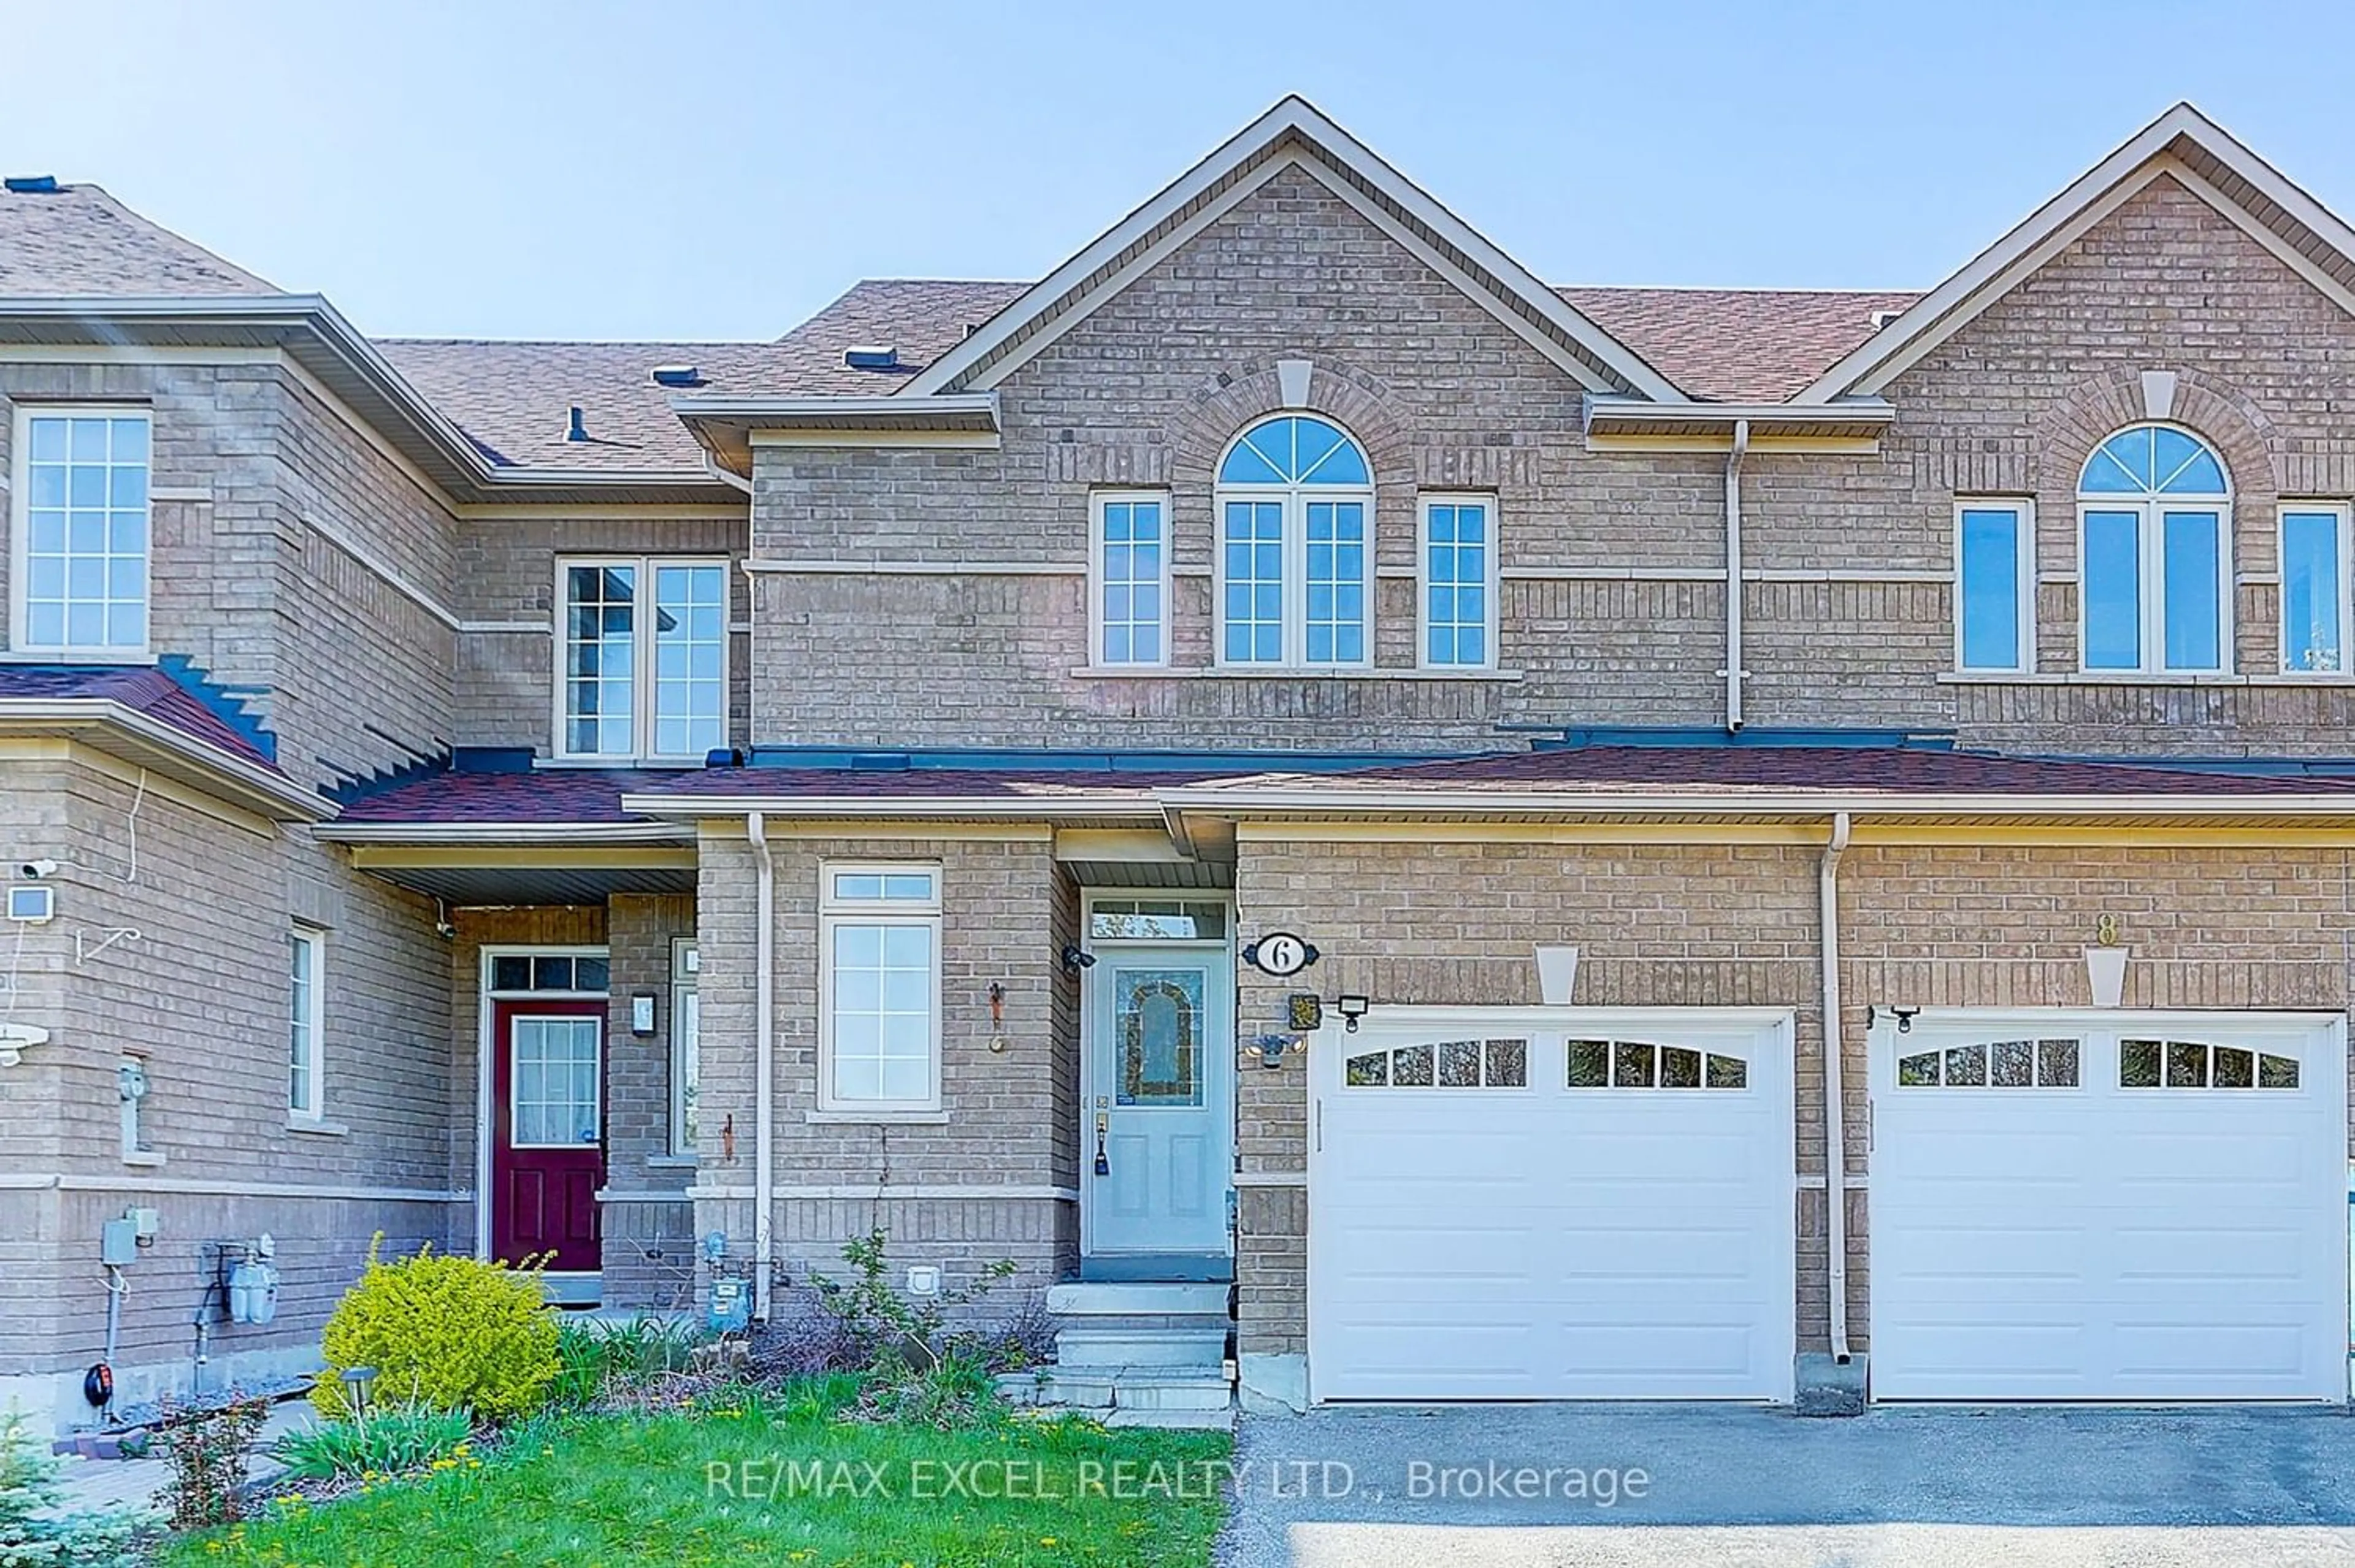 Home with brick exterior material for 6 Coco Ave, Richmond Hill Ontario L4S 2P2